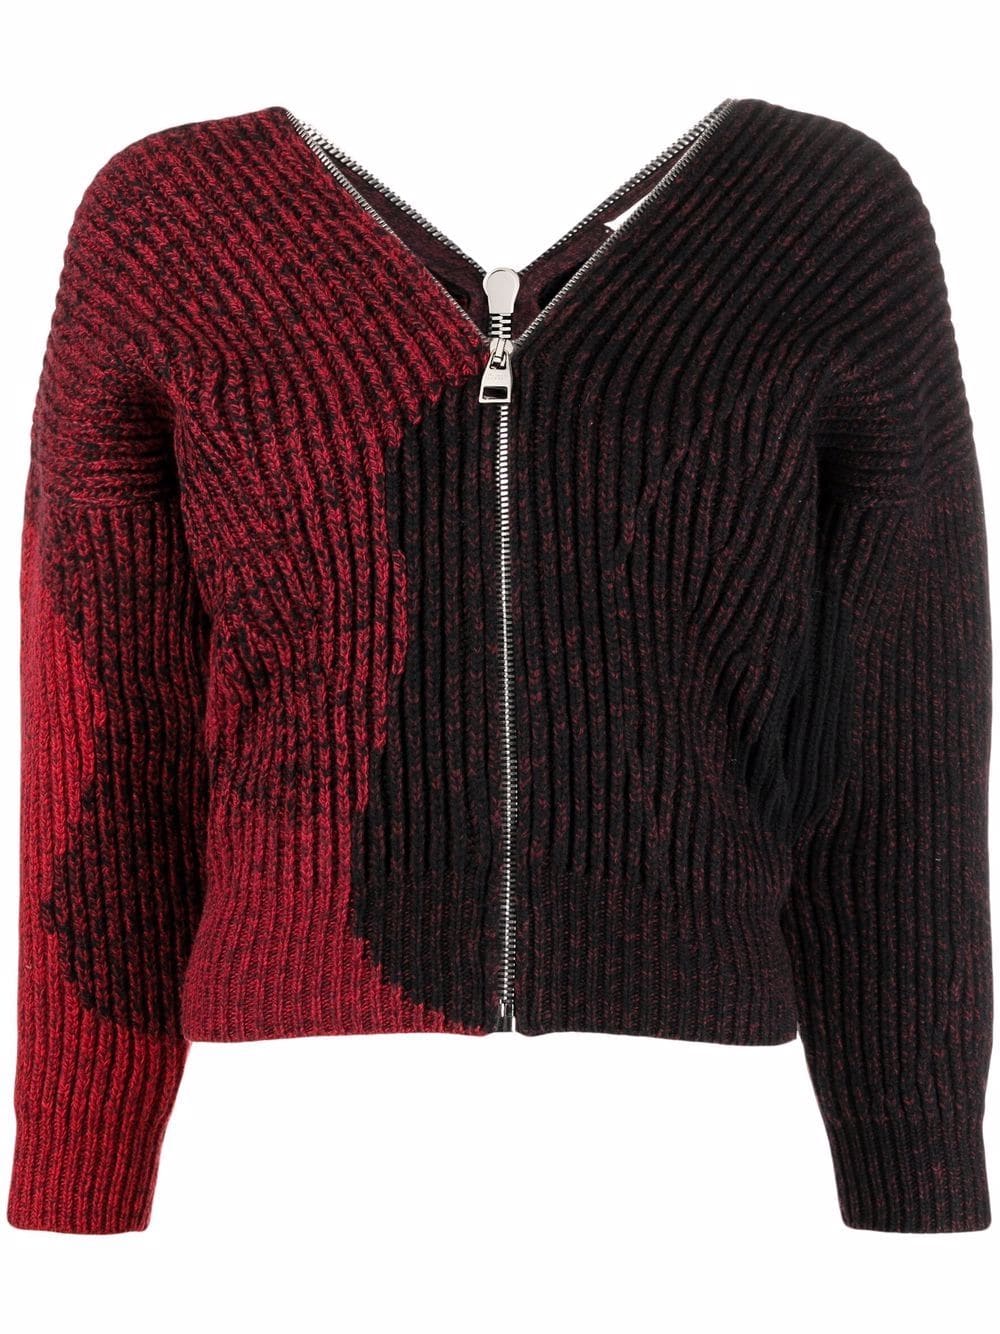 Image 1 of Alexander McQueen zipped-up V-neck sweater